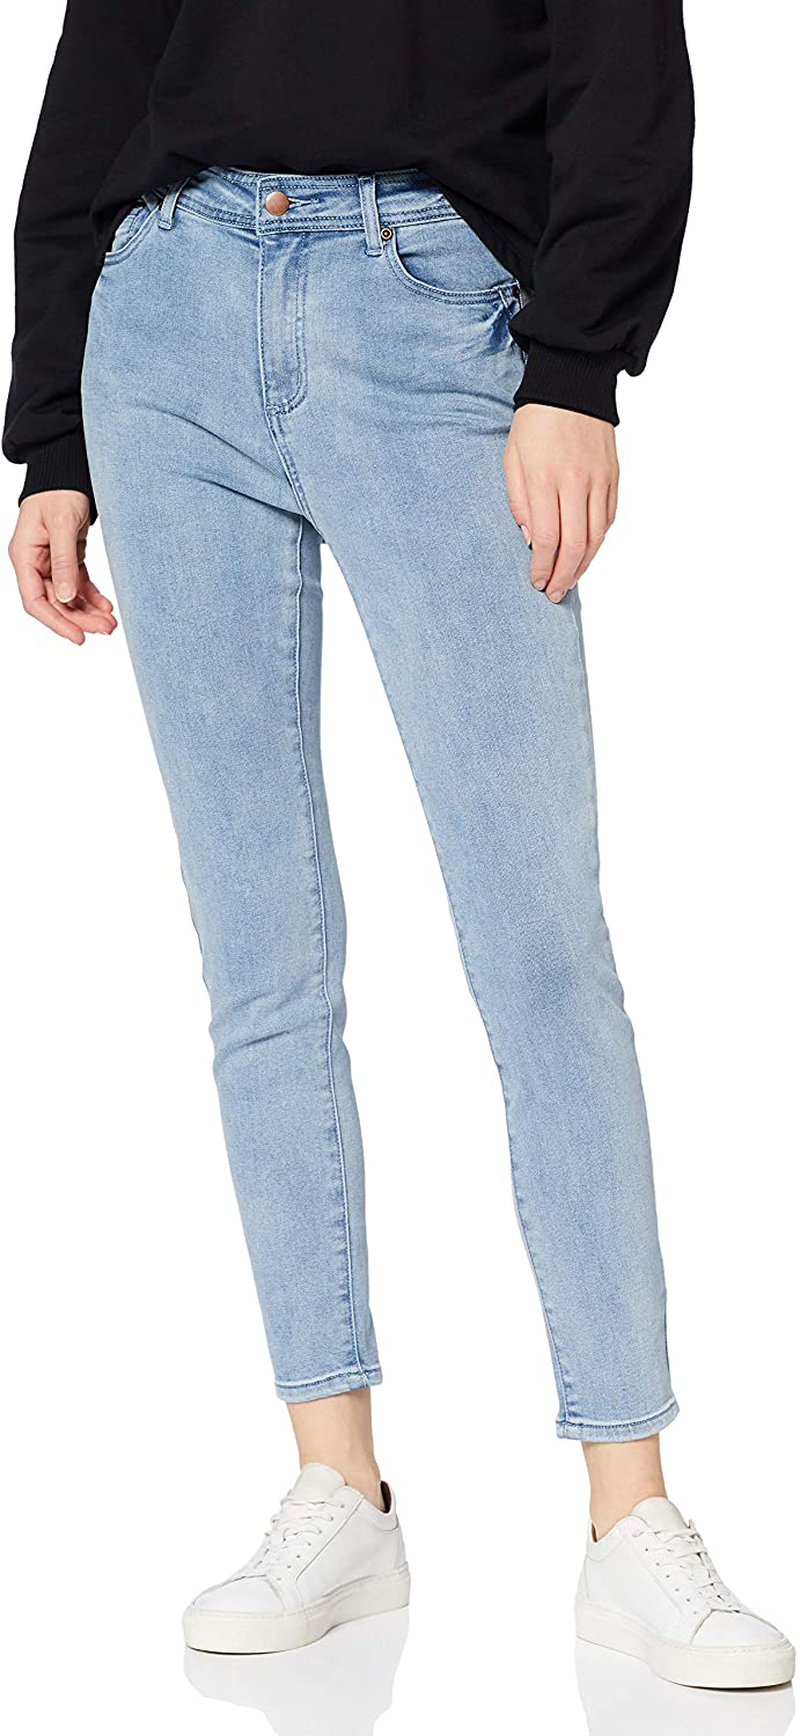 find. Women's Skinny Mid-Rise